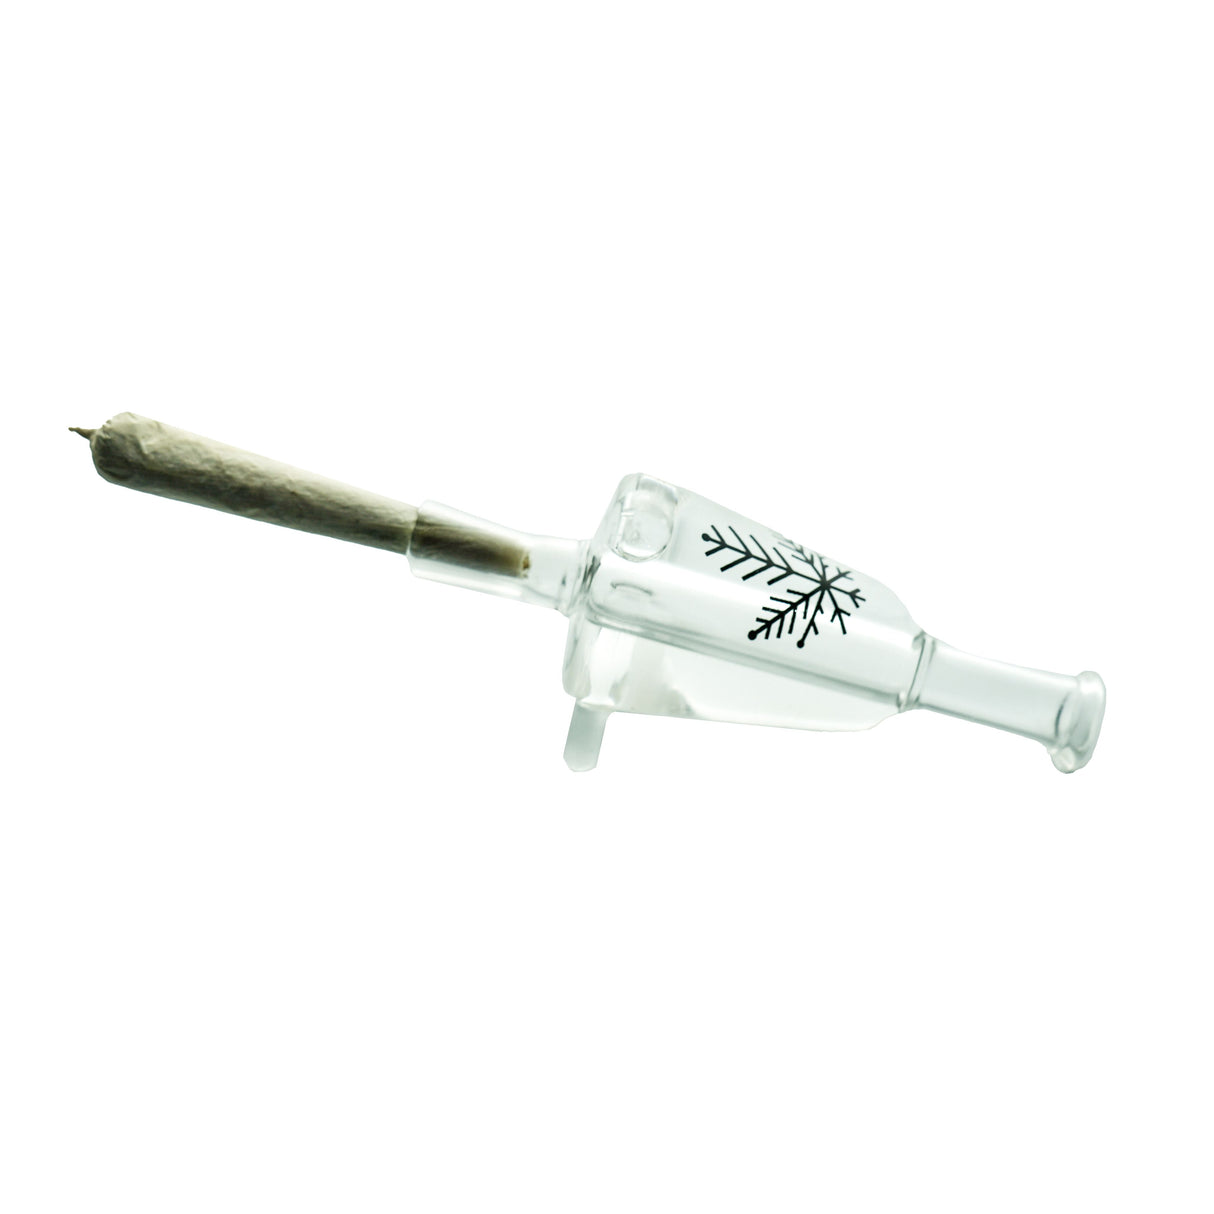 Freeze Pipe Glycerin Blunt Tip with cooling chamber for smooth hits, side view on white background